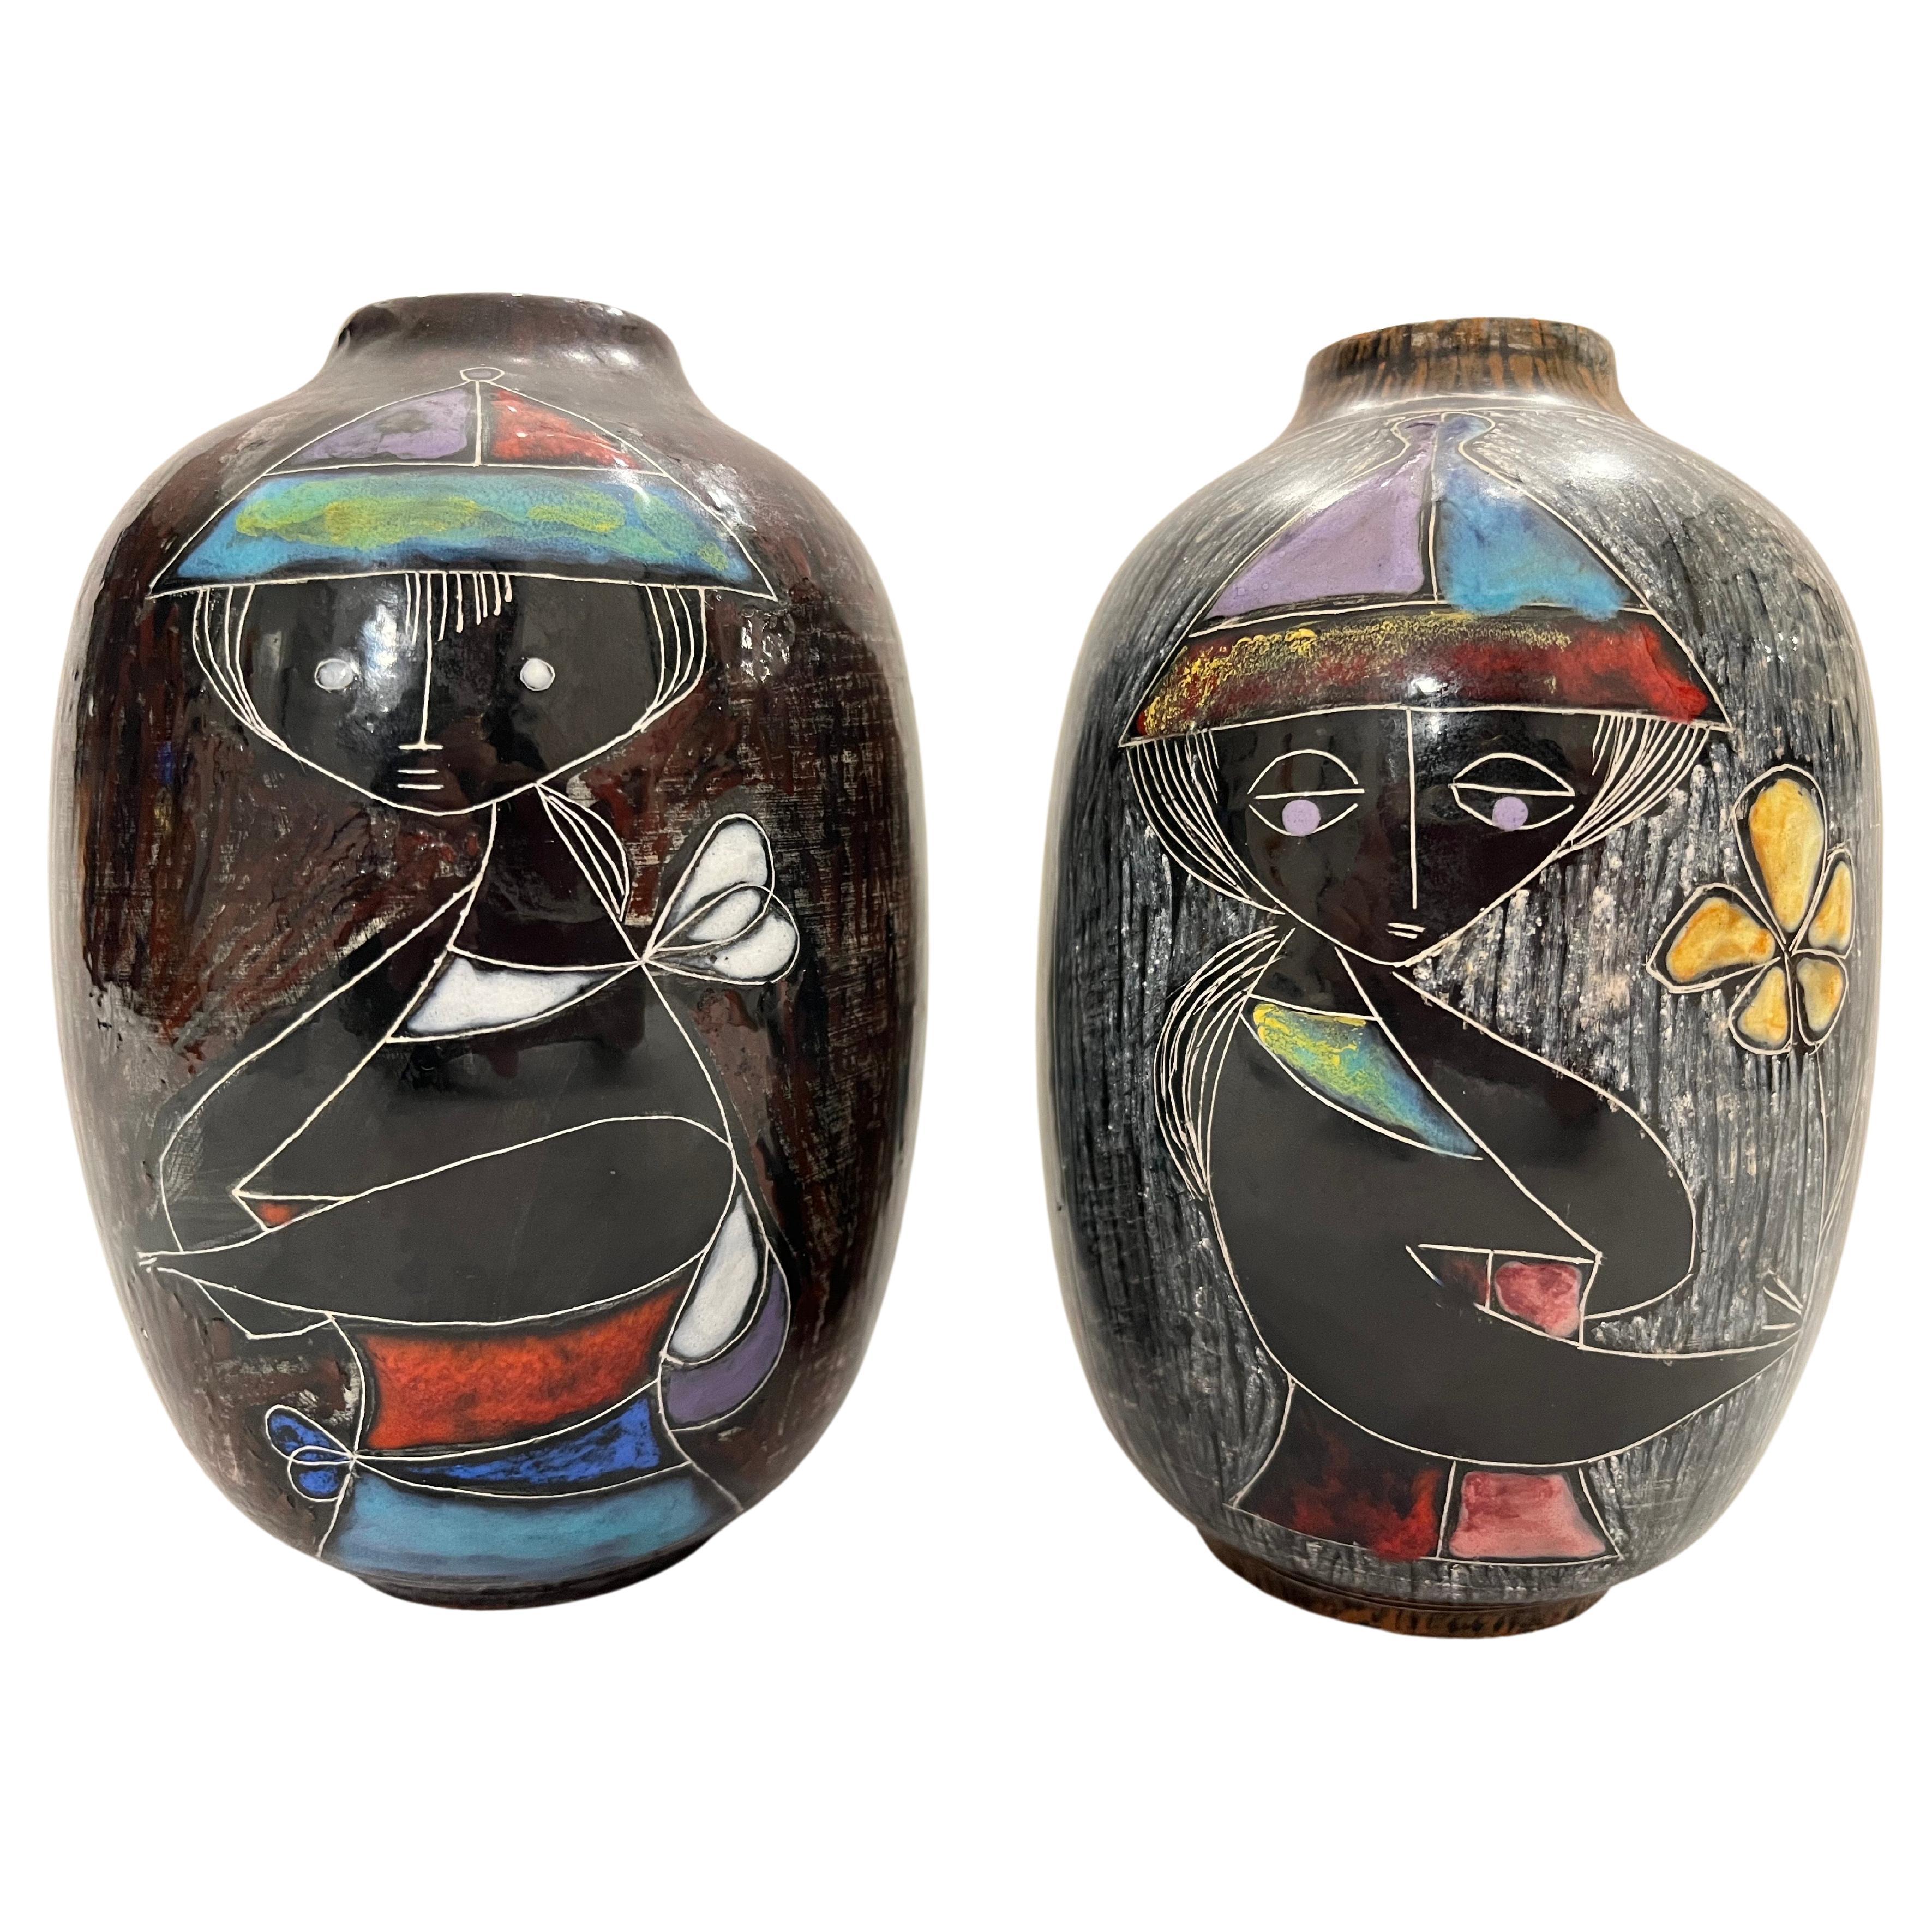 Two beautifully detailed vases by Italian artist Marcello Fantoni. Each vase presents in a wonderful colored in sgraffito style a portrait of a fetching woman. Each vase is signed on the bottom with one also being signed on the side. The vases are